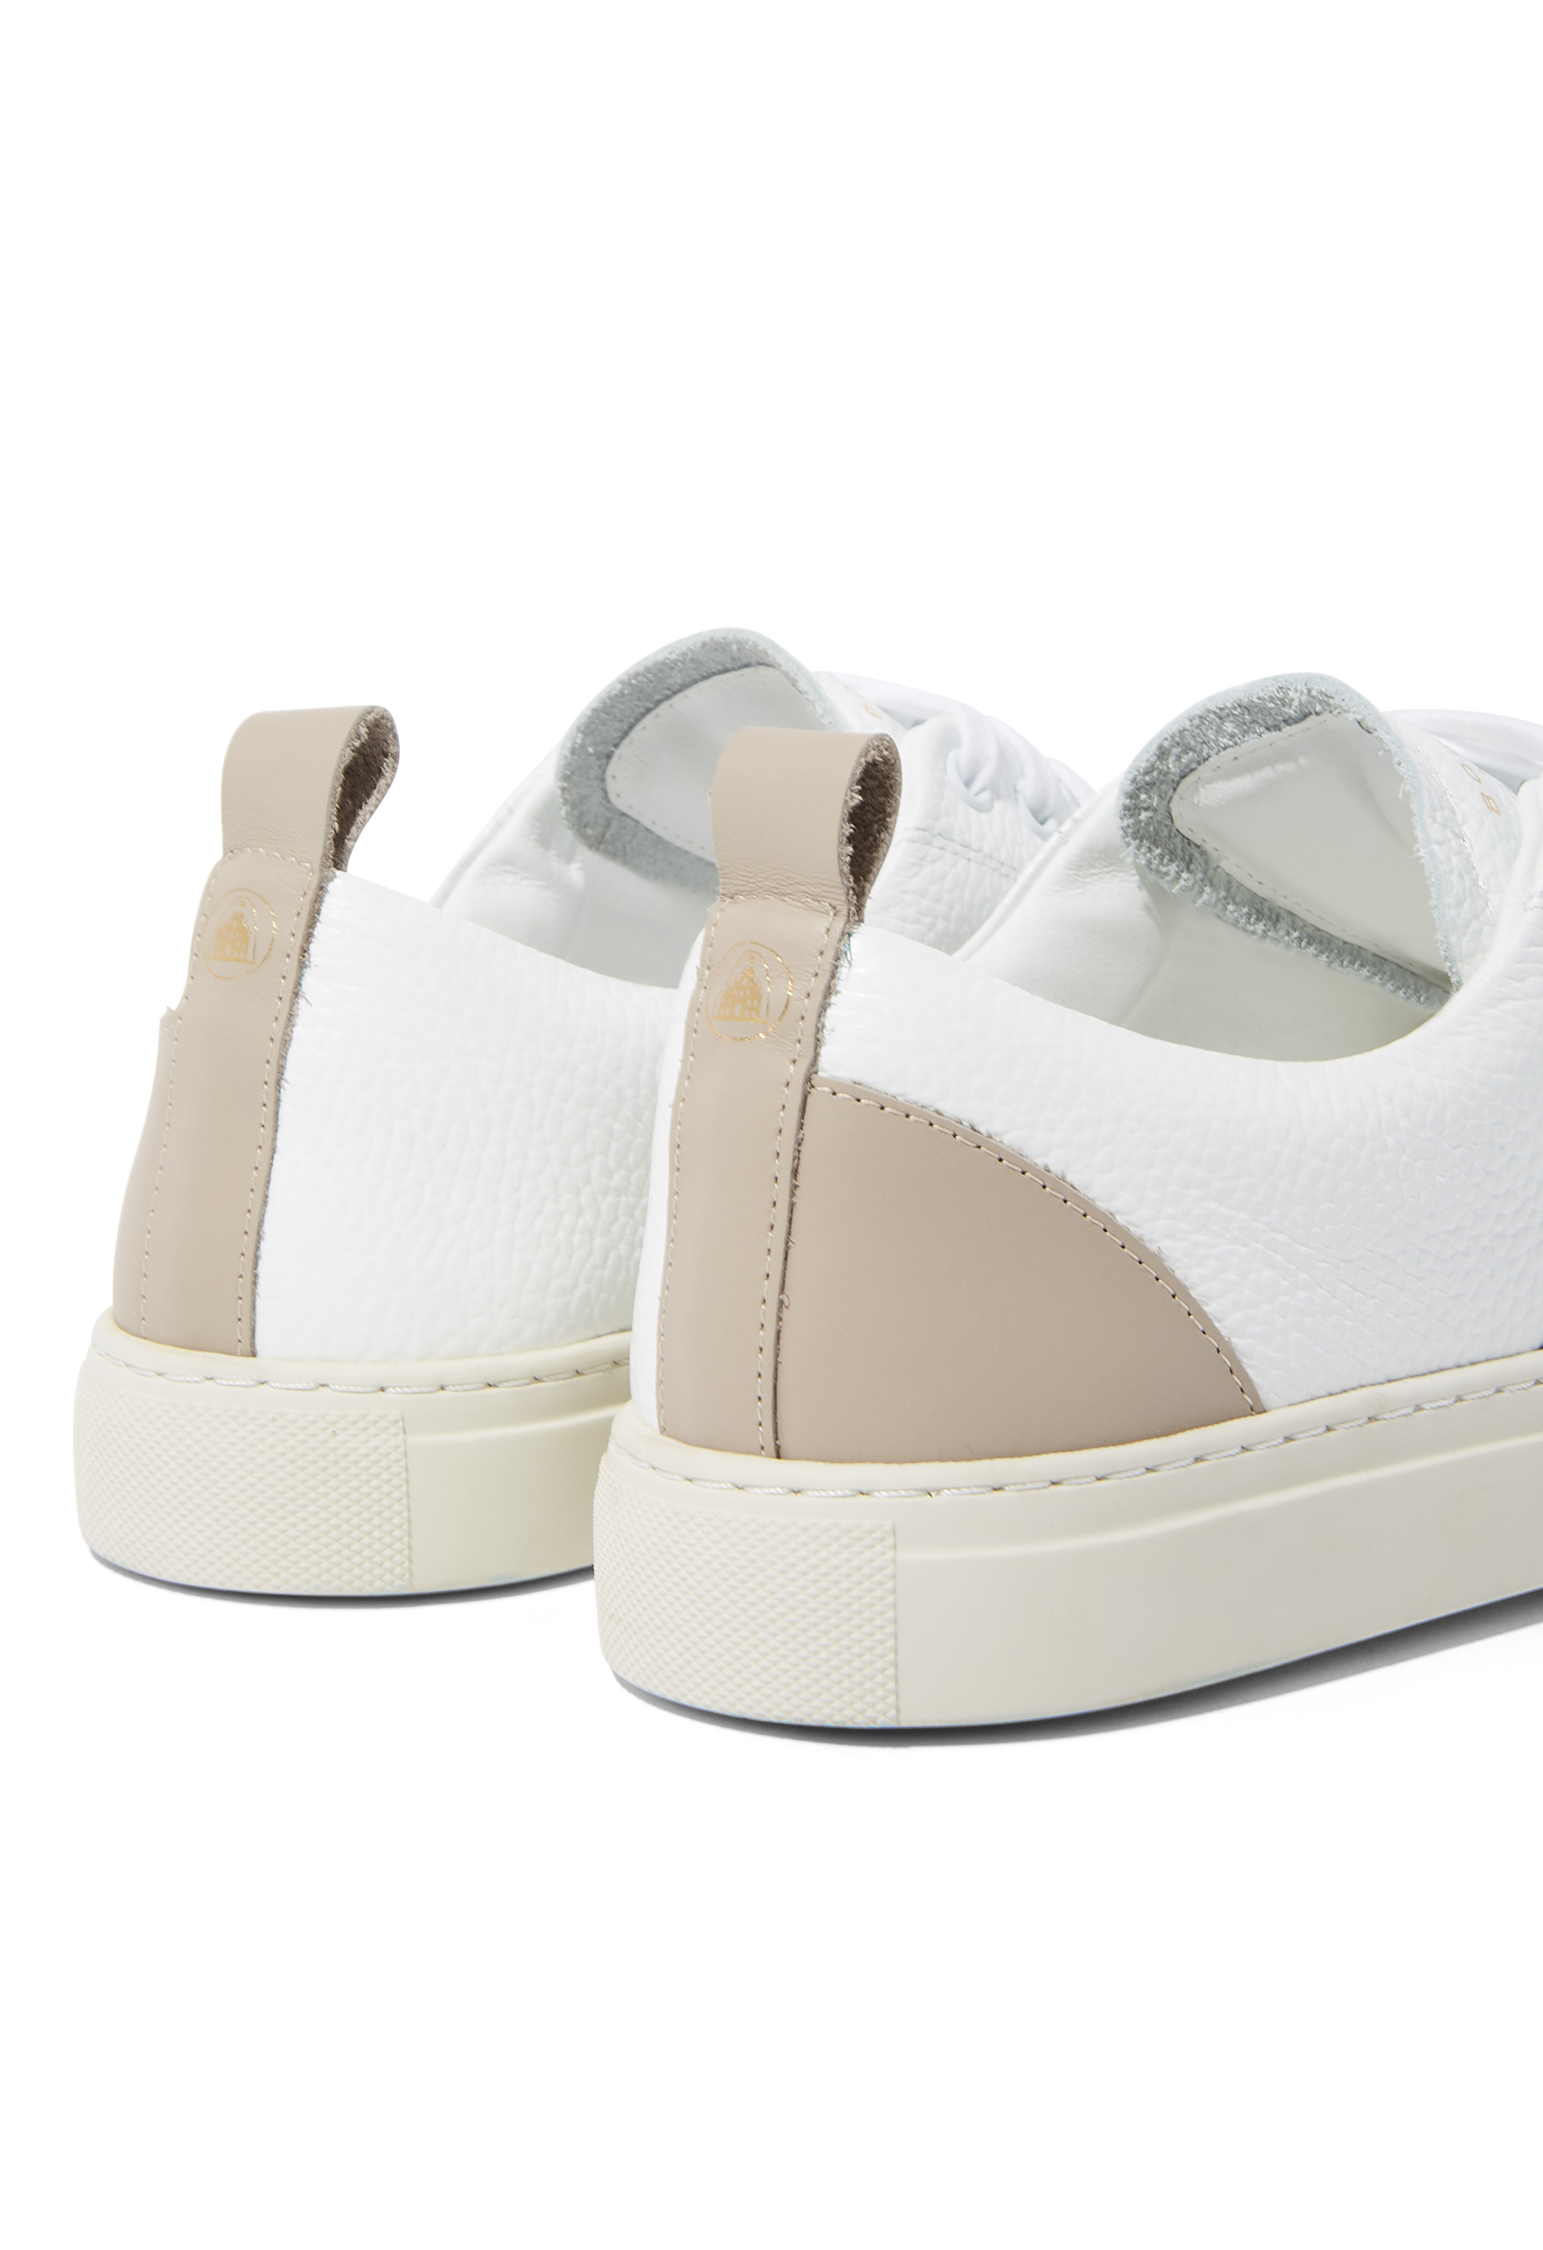 Shop Boglioli White And Beige 100% Leather Sneakers In White And Beige Color